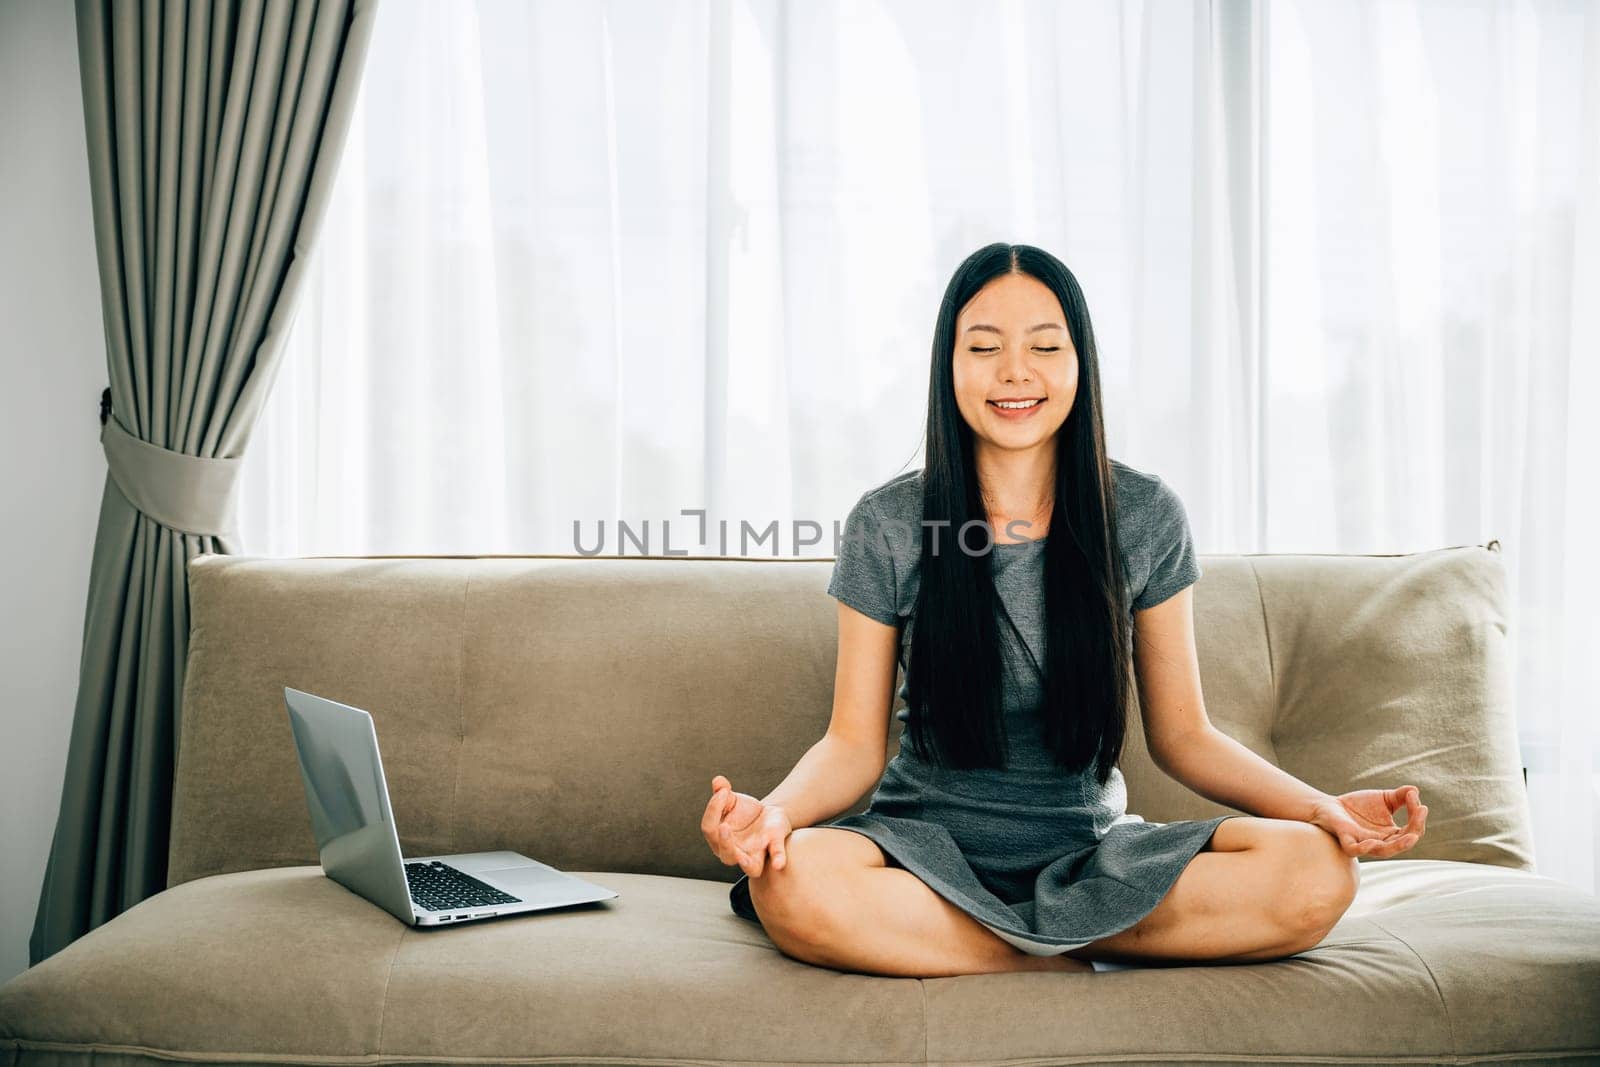 A serene Asian woman on sofa uses laptop meditating in lotus pose. Businesswoman finds relaxation and balance while practicing mindfulness online. Smiling student embodies harmony in the office.